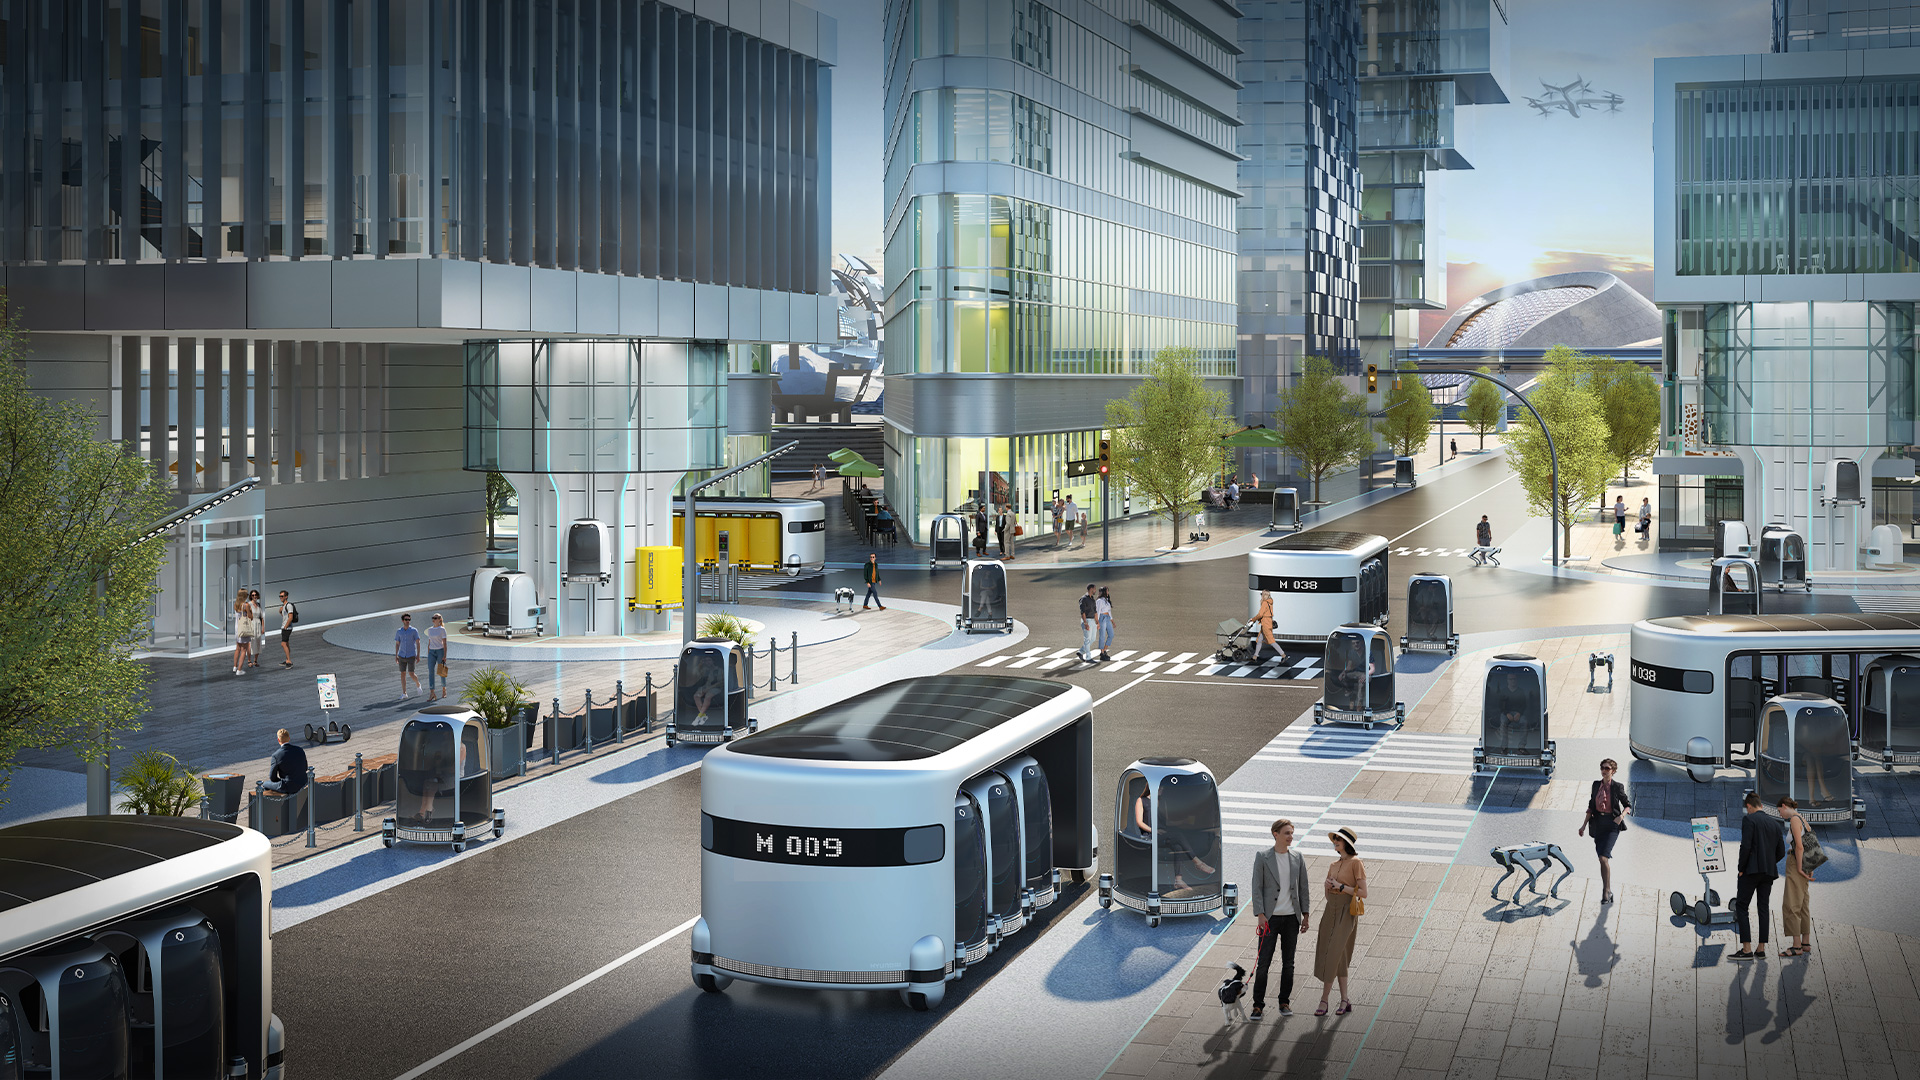 As the future city that Hyundai Motors dreams of, people are moving freely in the city center using pbv.